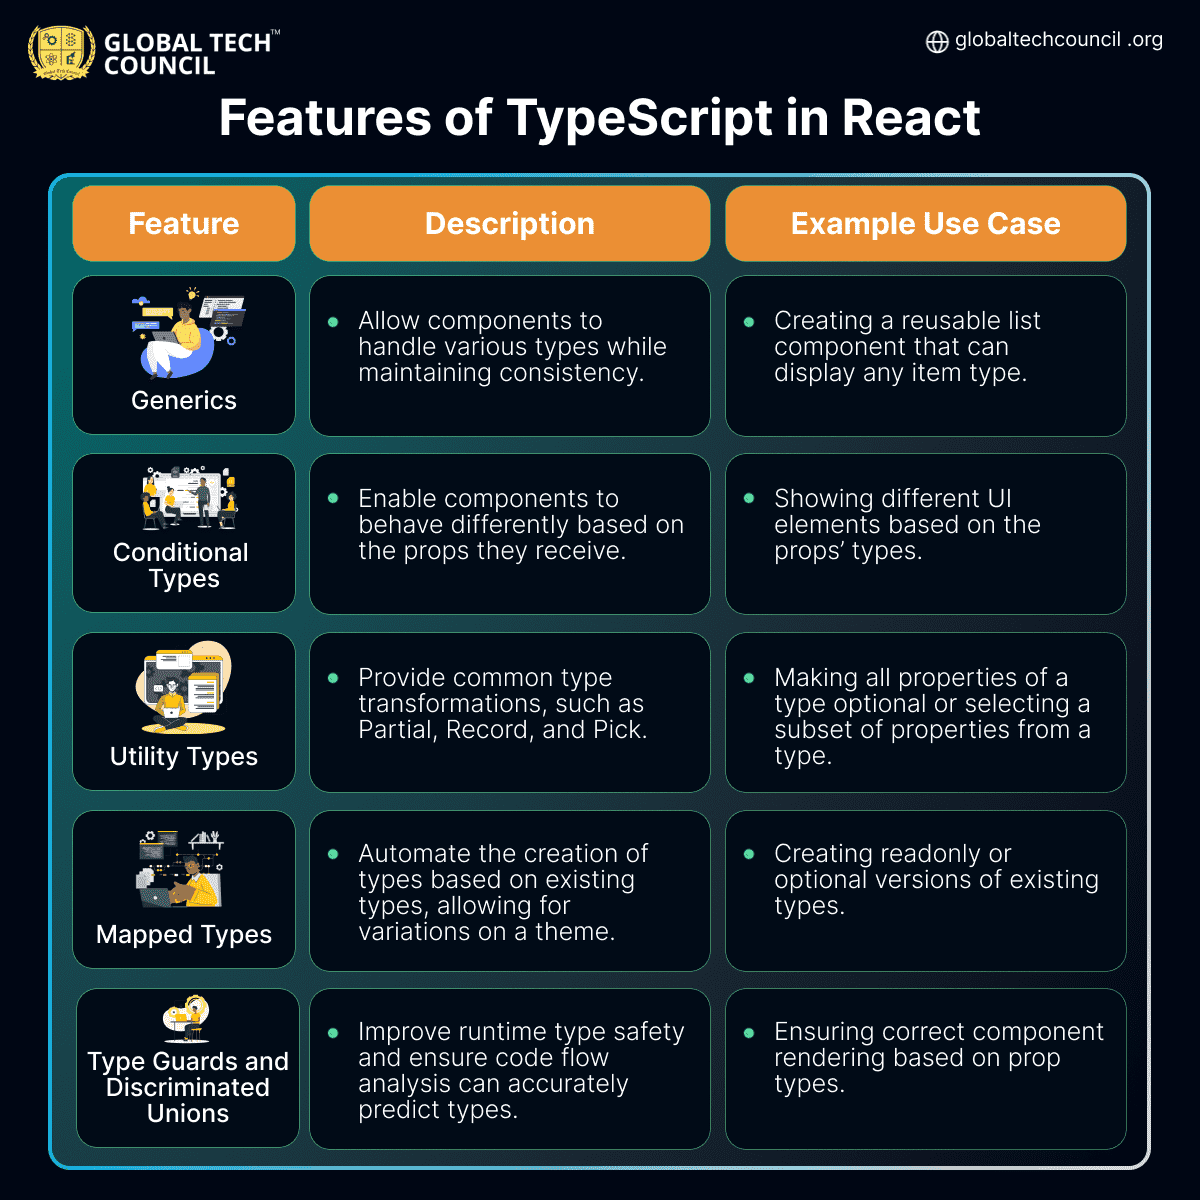 Features of TypeScript in React